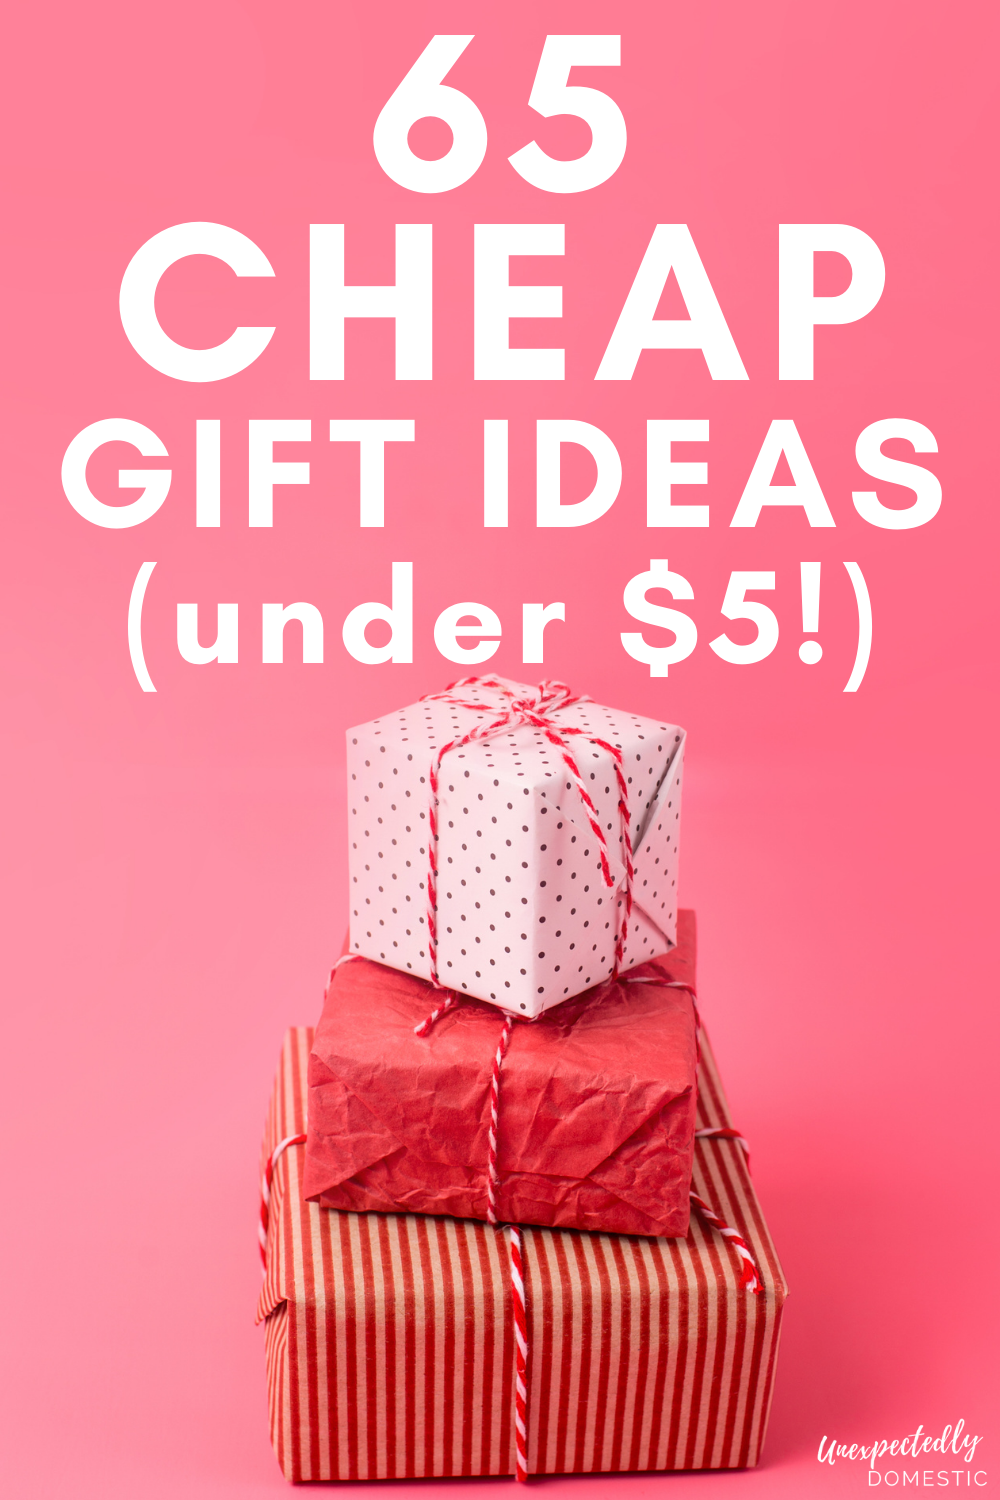 https://www.unexpectedlydomestic.com/wp-content/uploads/2020/12/5-dollar-gift-ideas.png